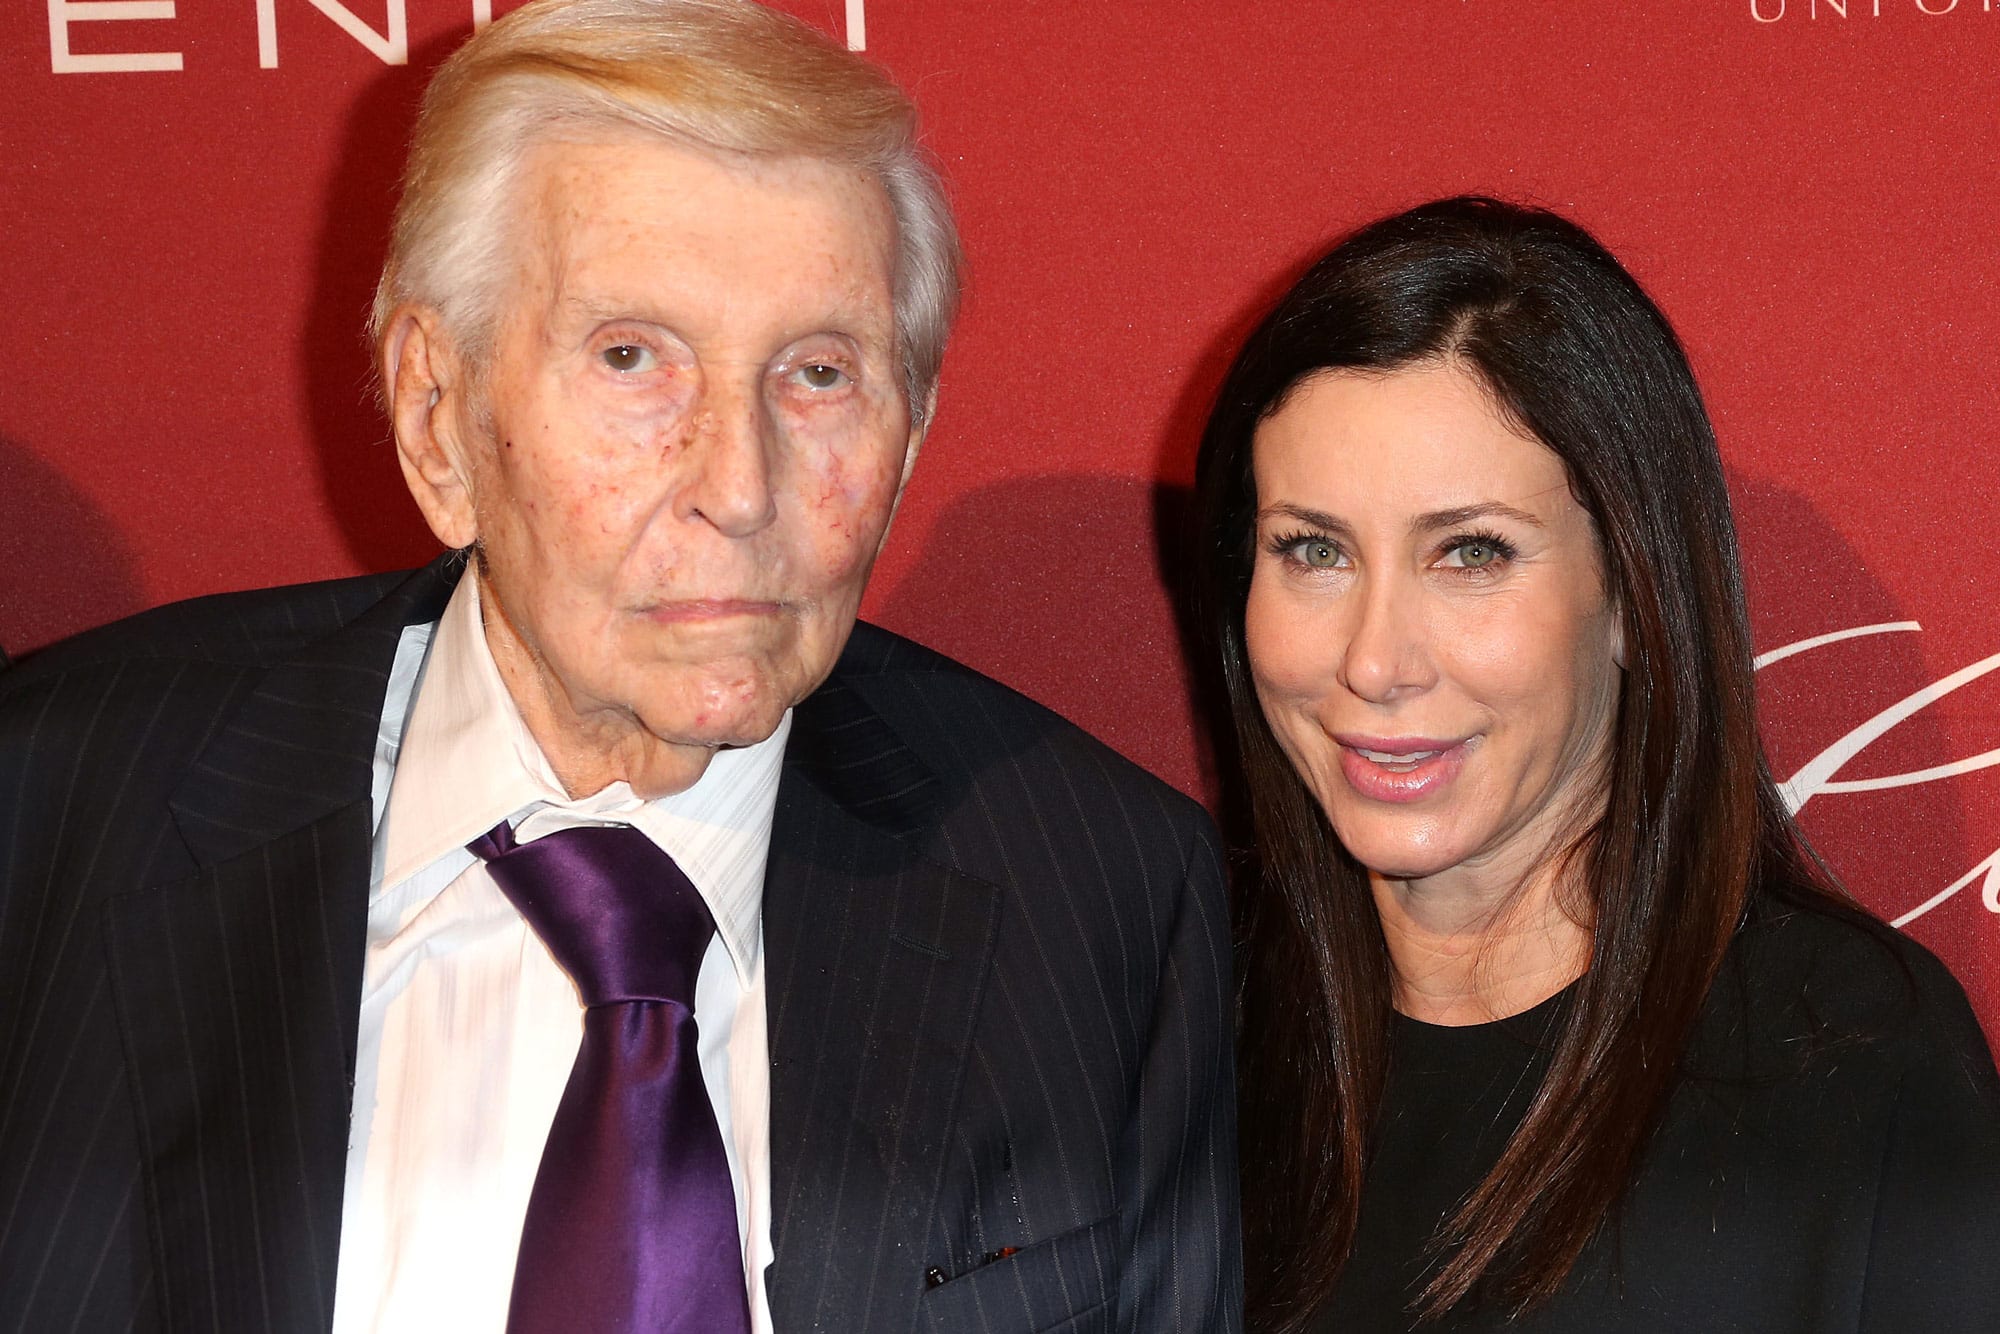 Elite vampirism: Dead at 97, media mogul Sumner Redstone thought he would live forever by drinking a ‘certain wine’